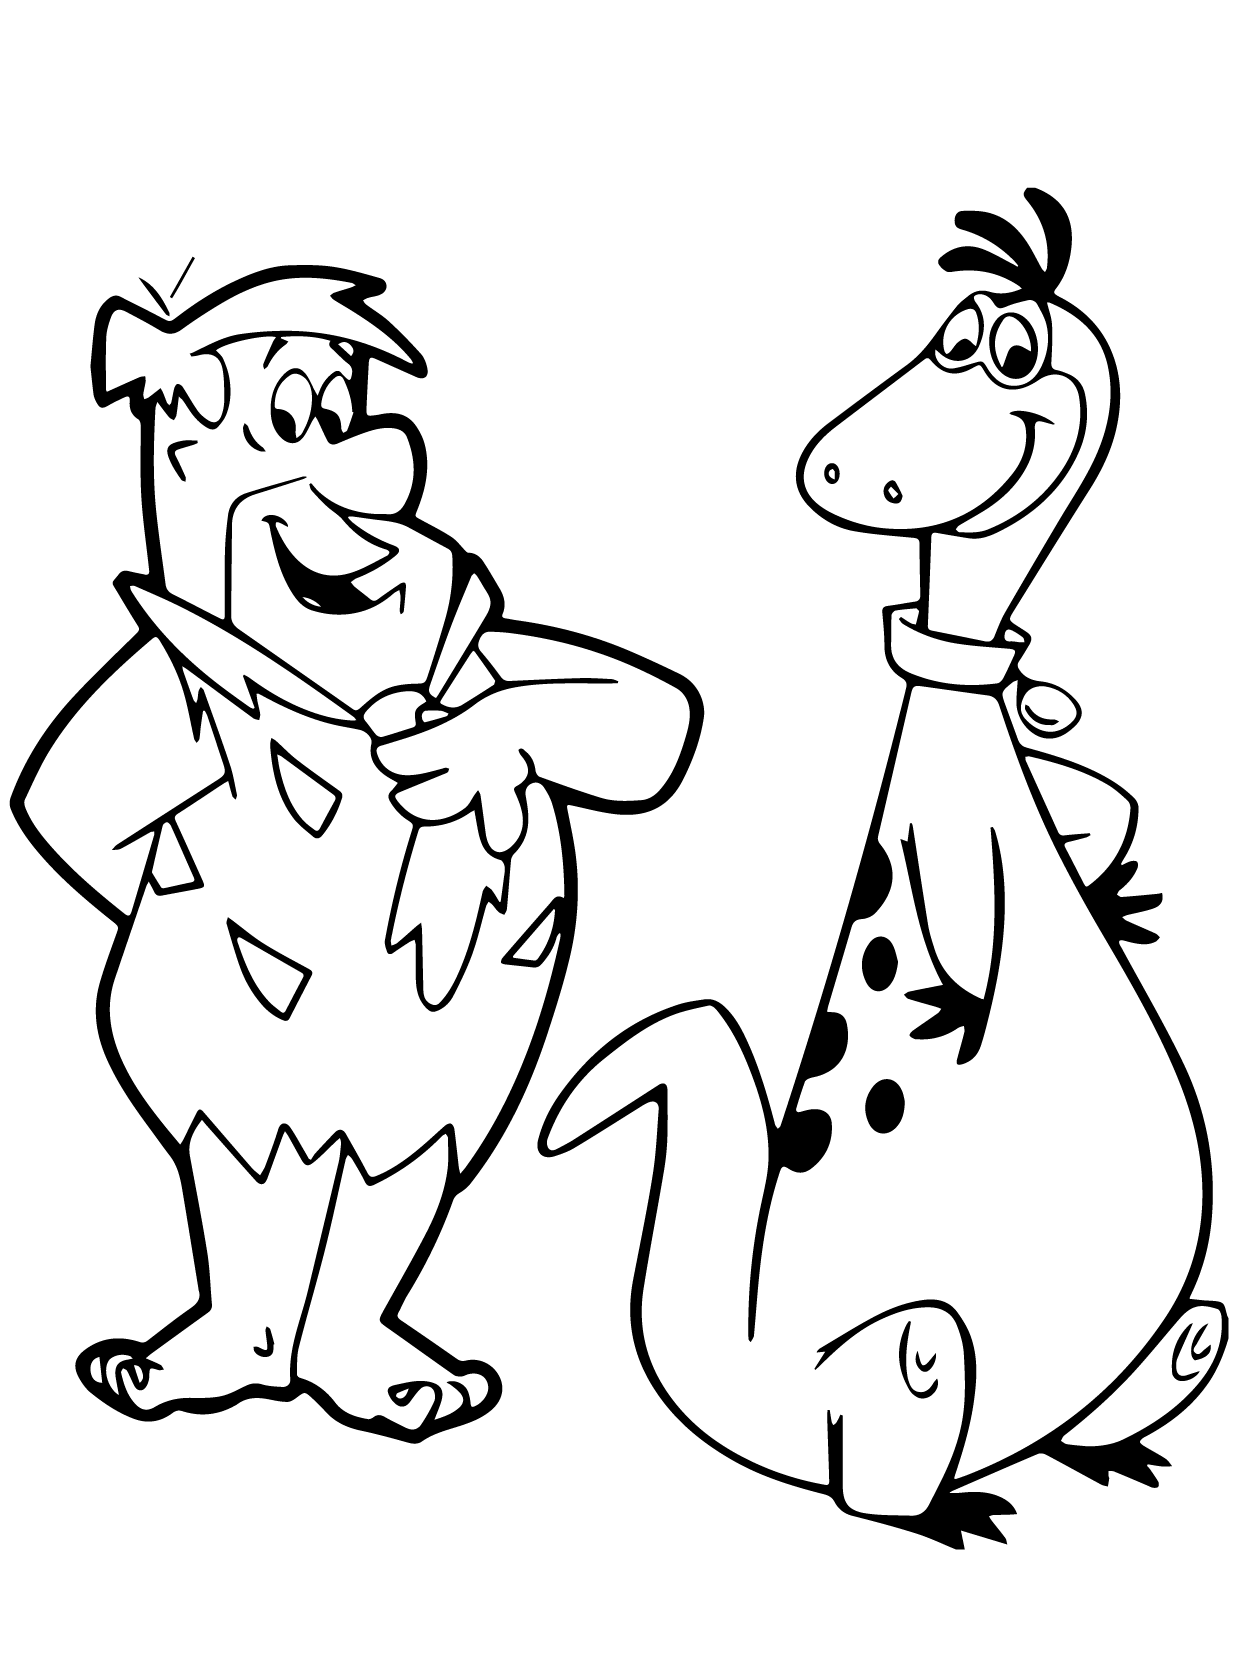 Fred and Dino